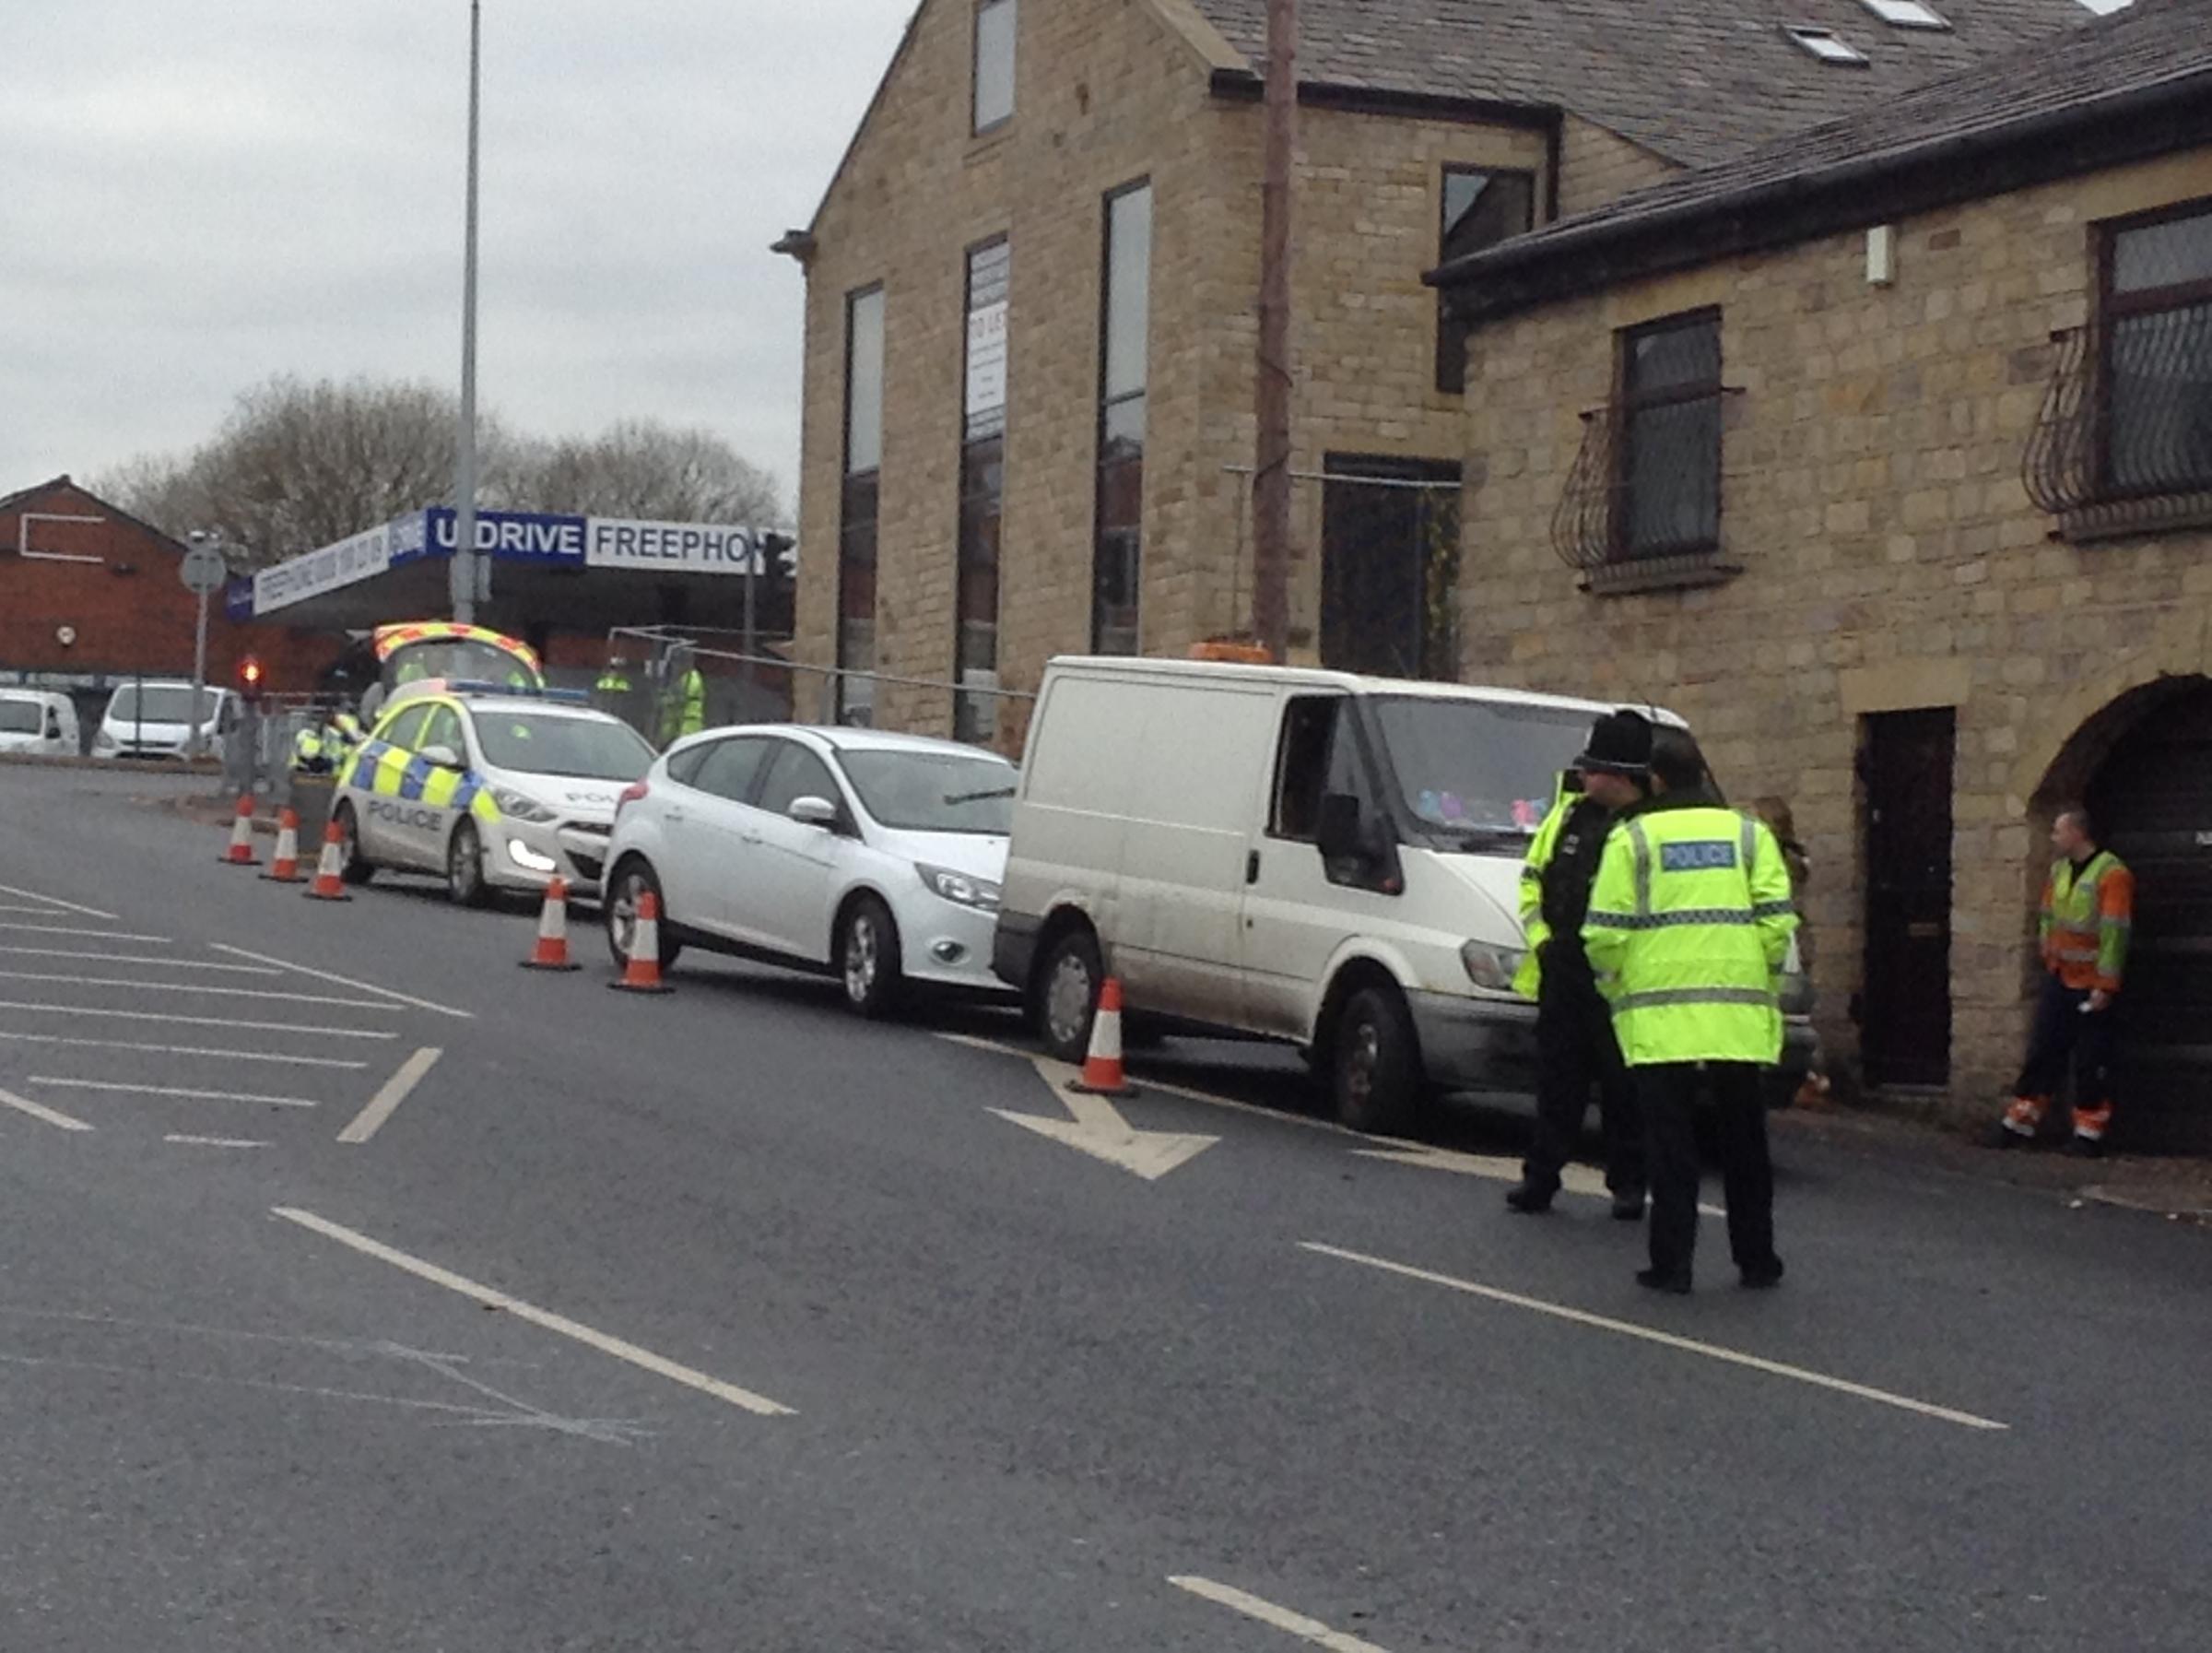 Police's drink-drive checkpoint causes delays for morning commuters